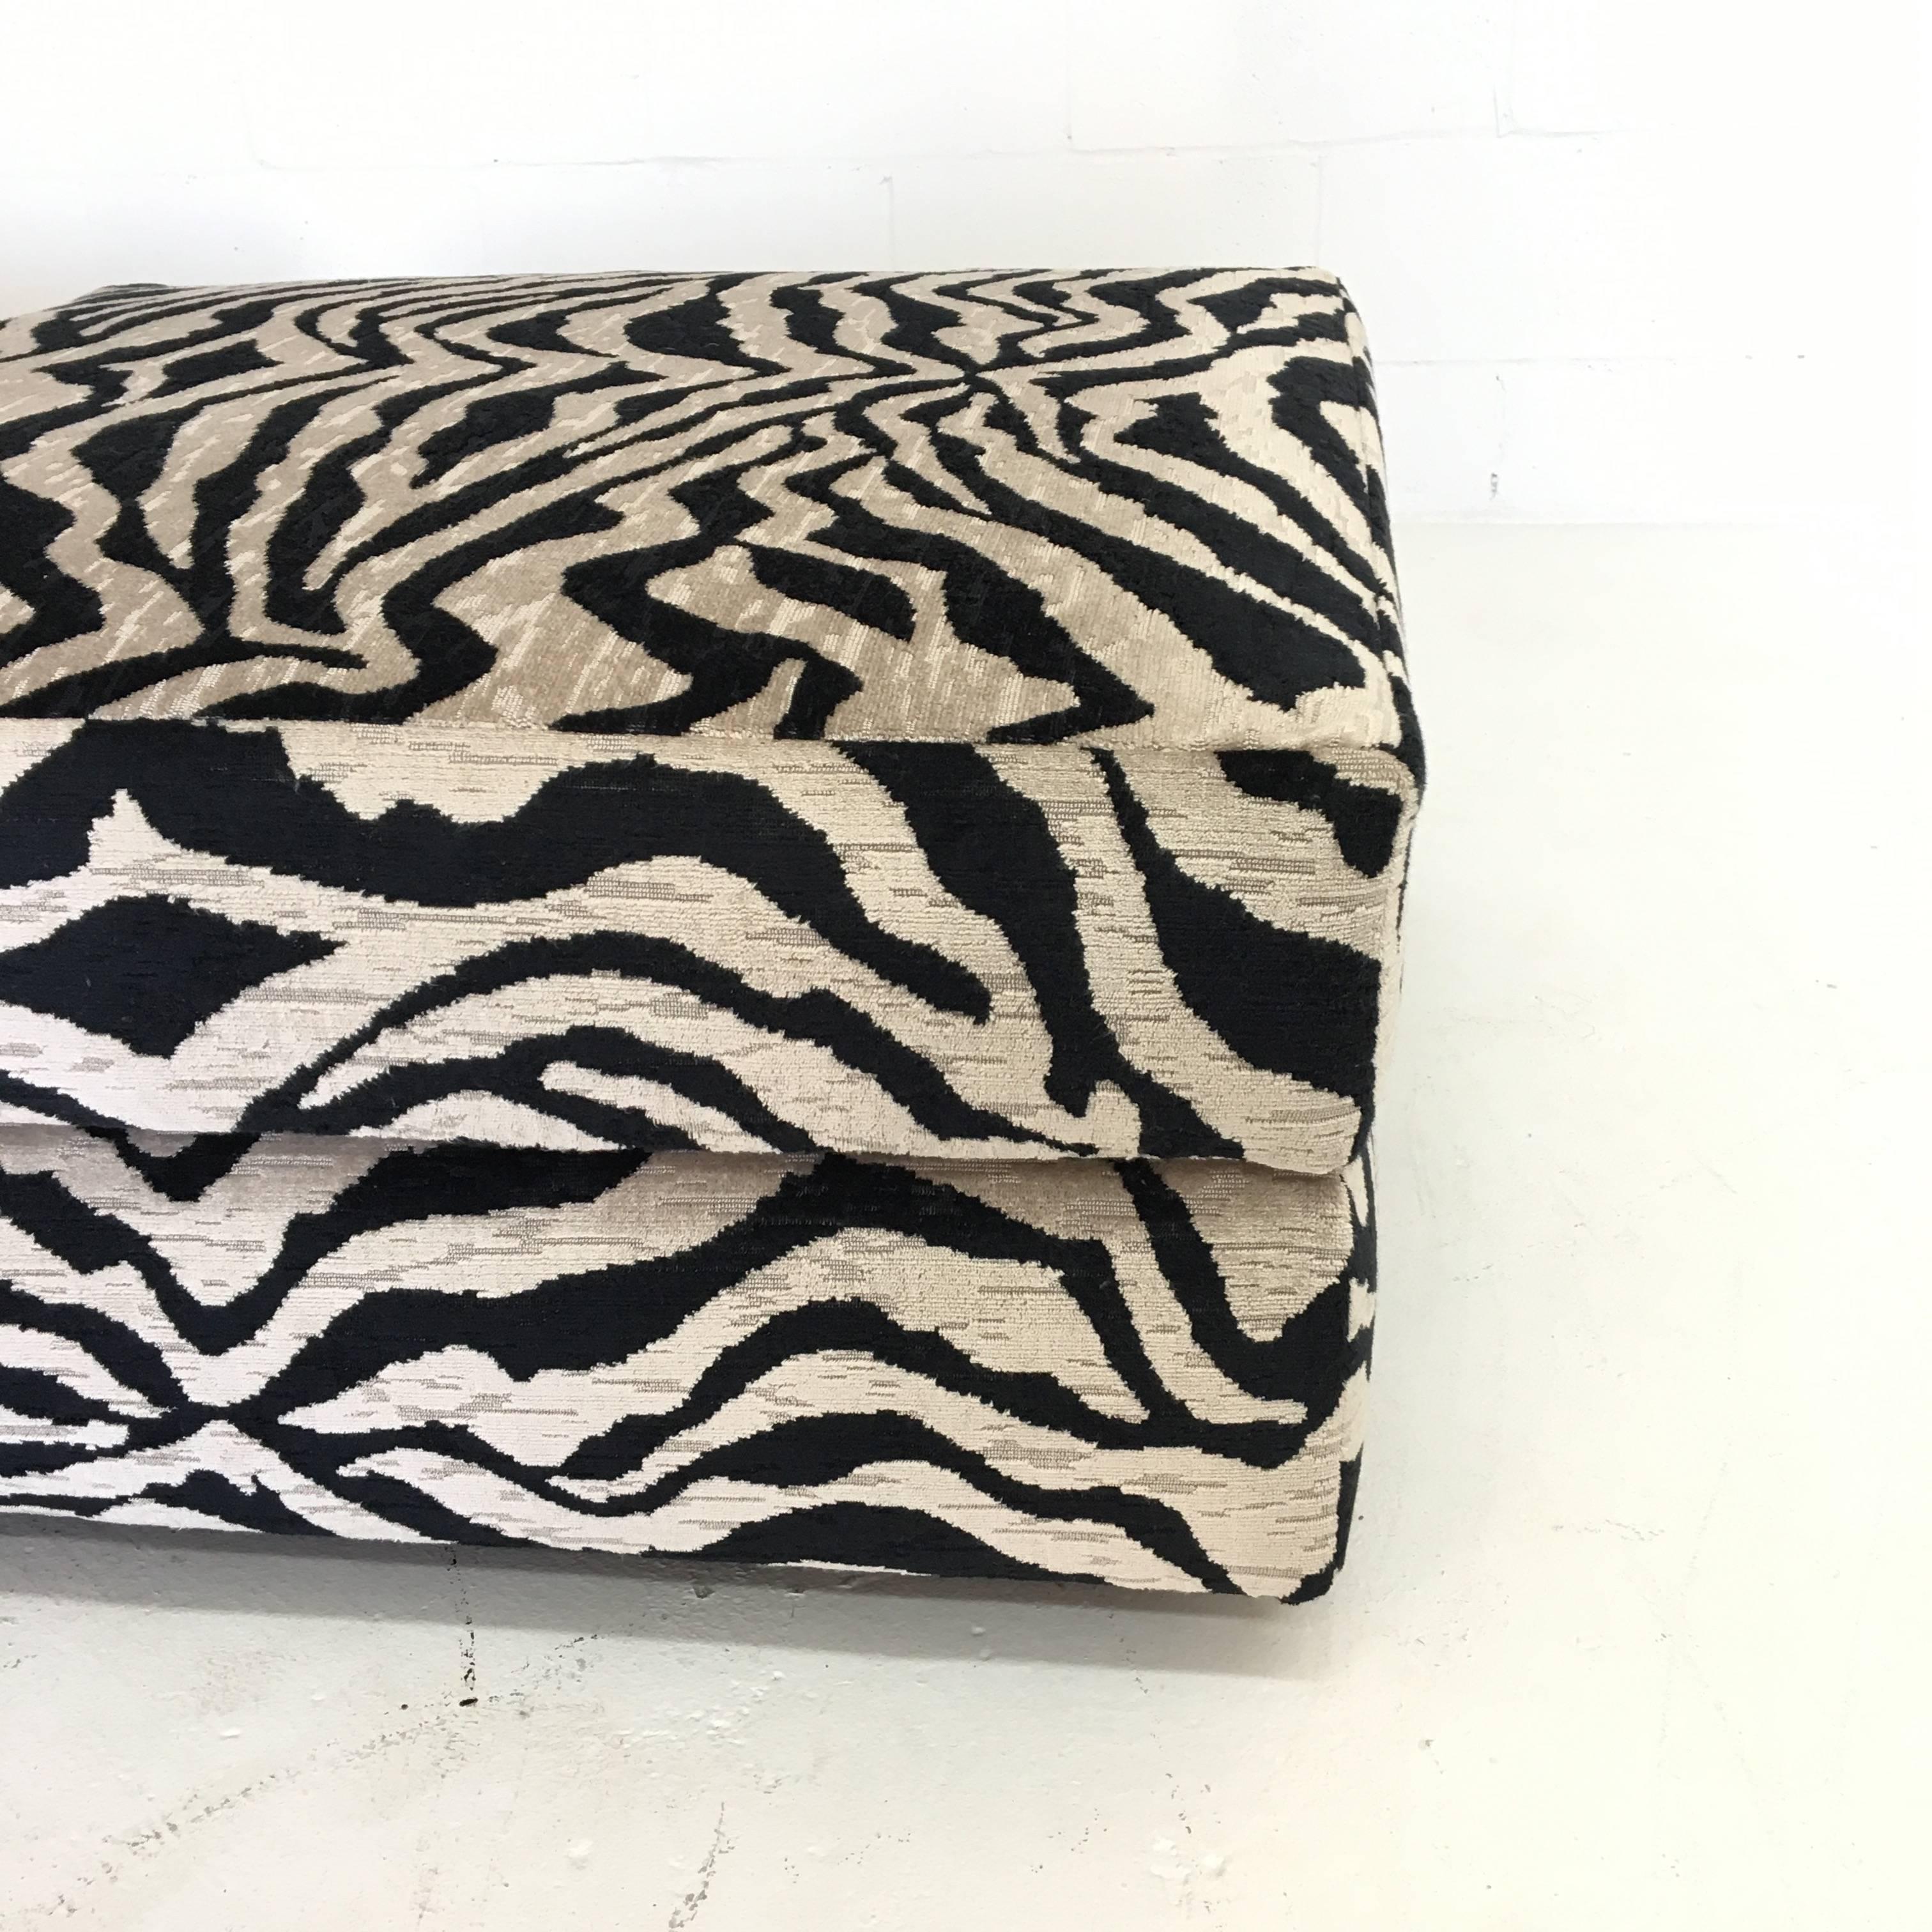 Hollywood Regency Pair of Large Square Ottomans in Zebra